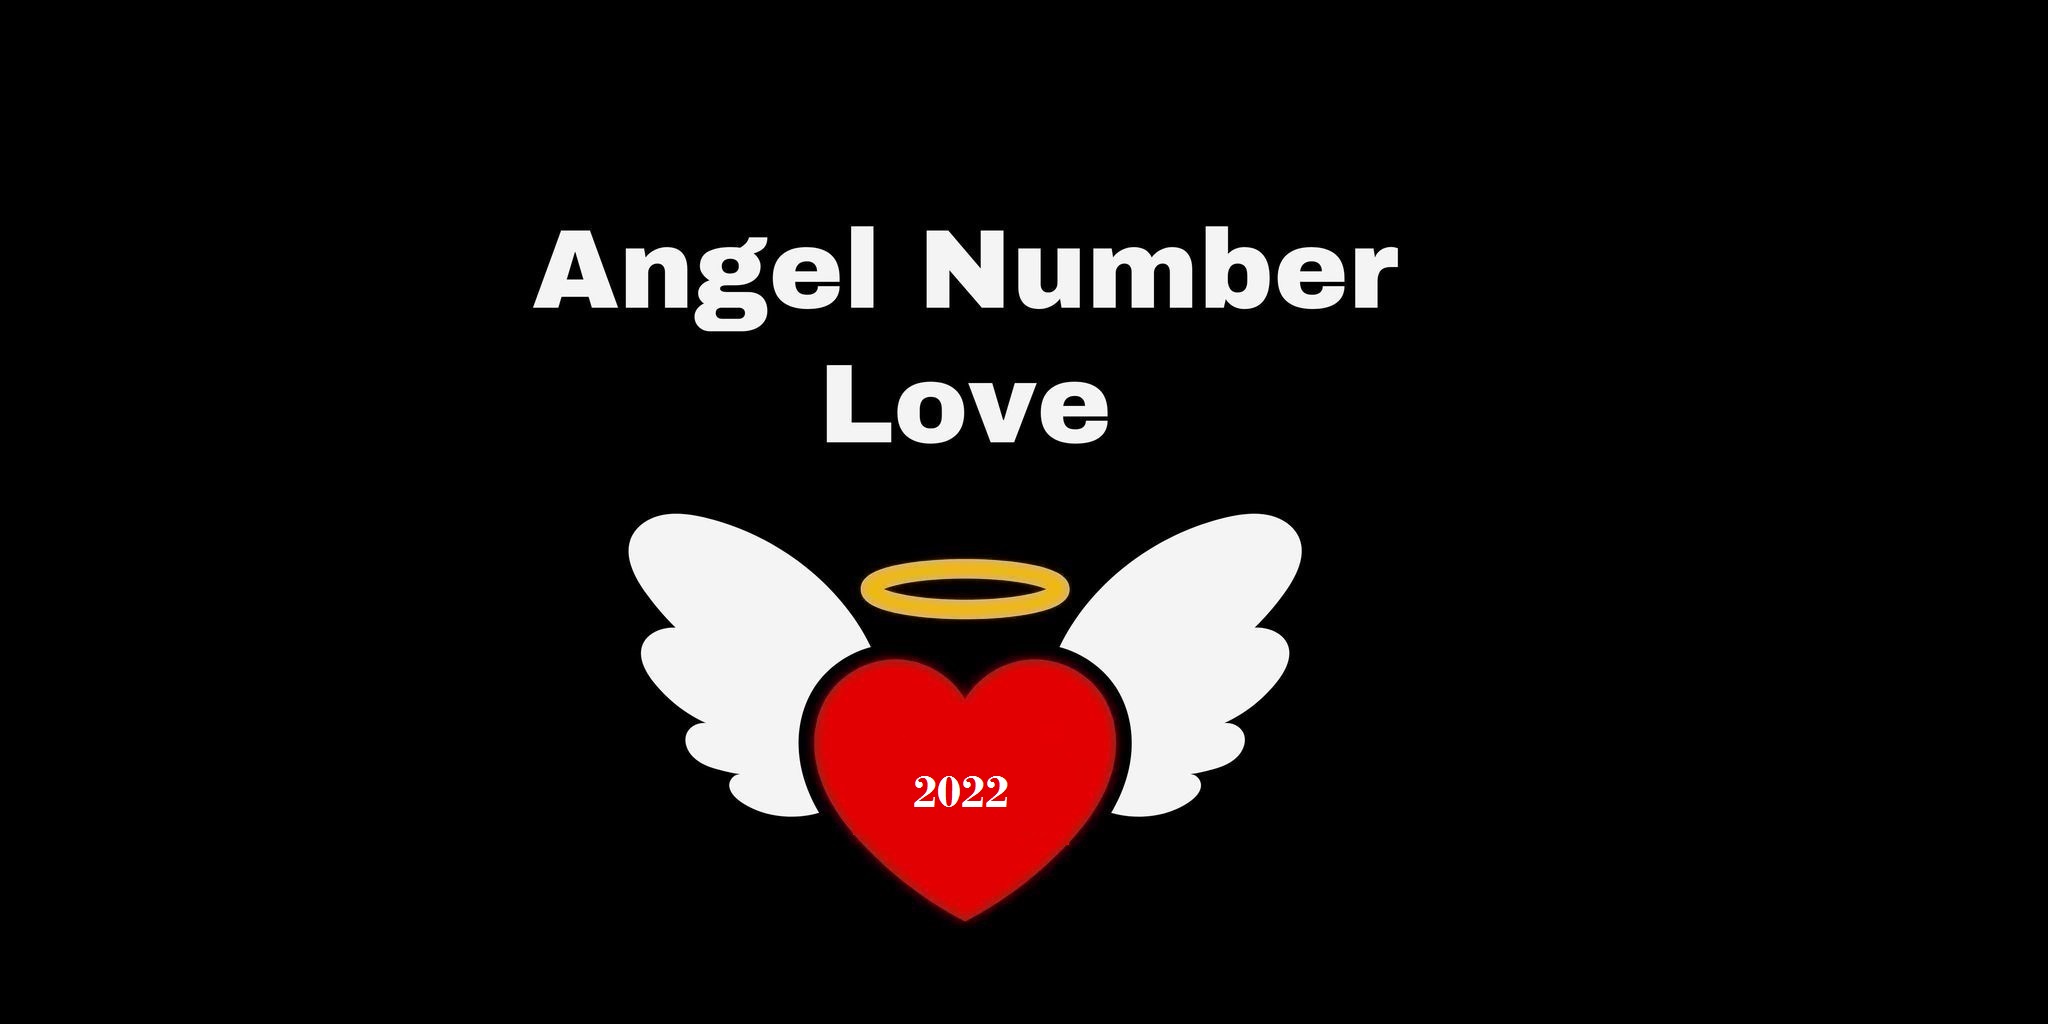 2022 Angel Number Meaning In Love